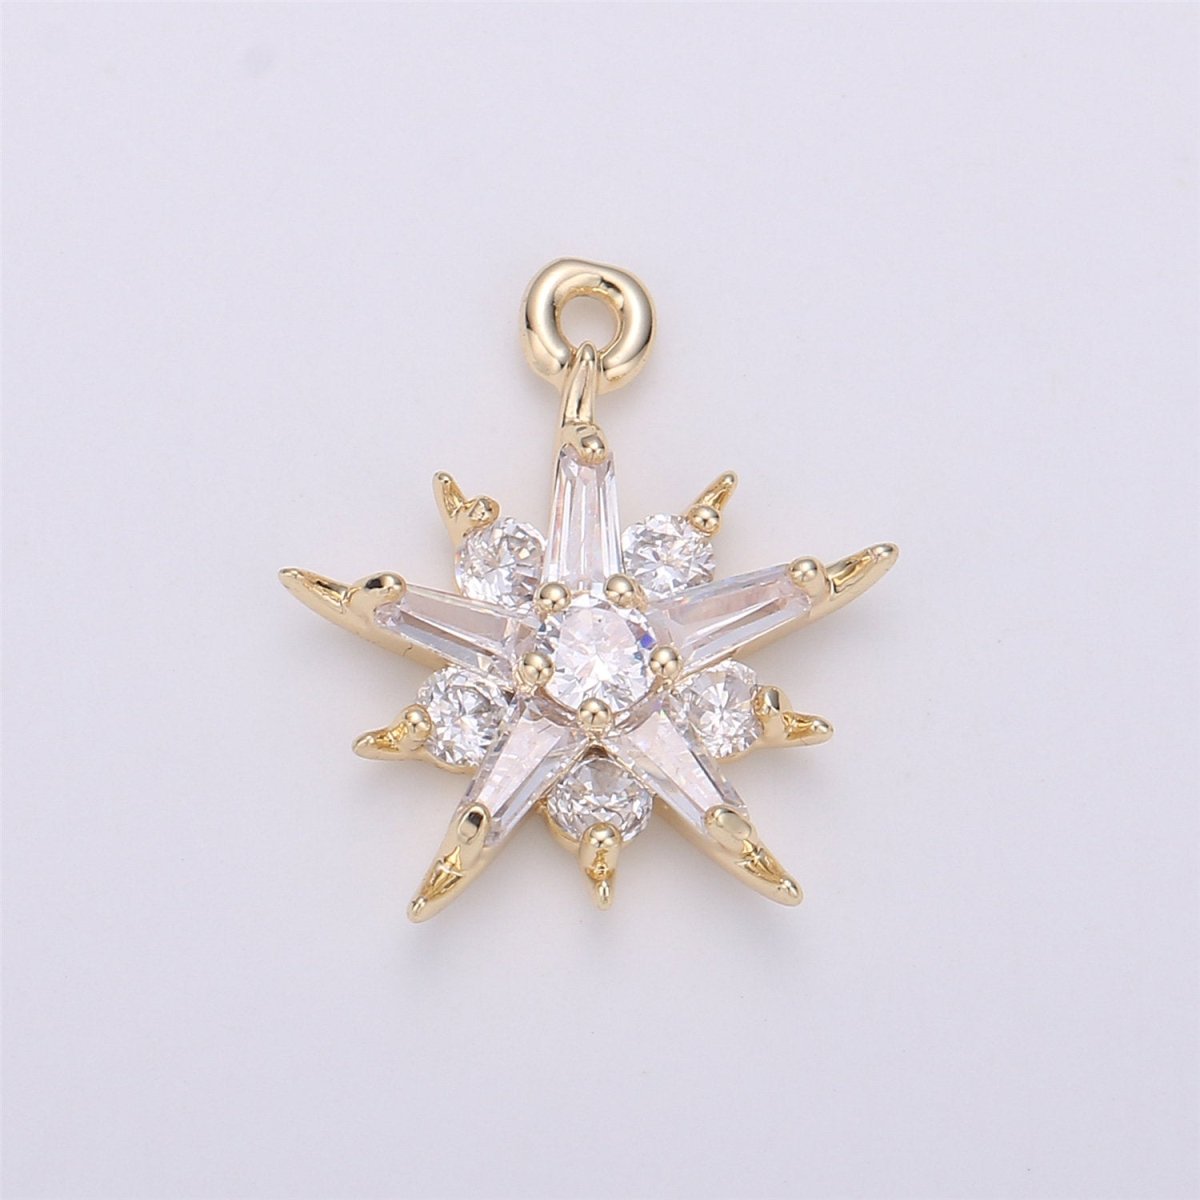 Dainty Baguette Star flower Pendant Charm Pave Snowflake Charm in 14k Gold Filled Charm for Necklace Bracelet Earring Jewelry Making Supply C-522 - DLUXCA